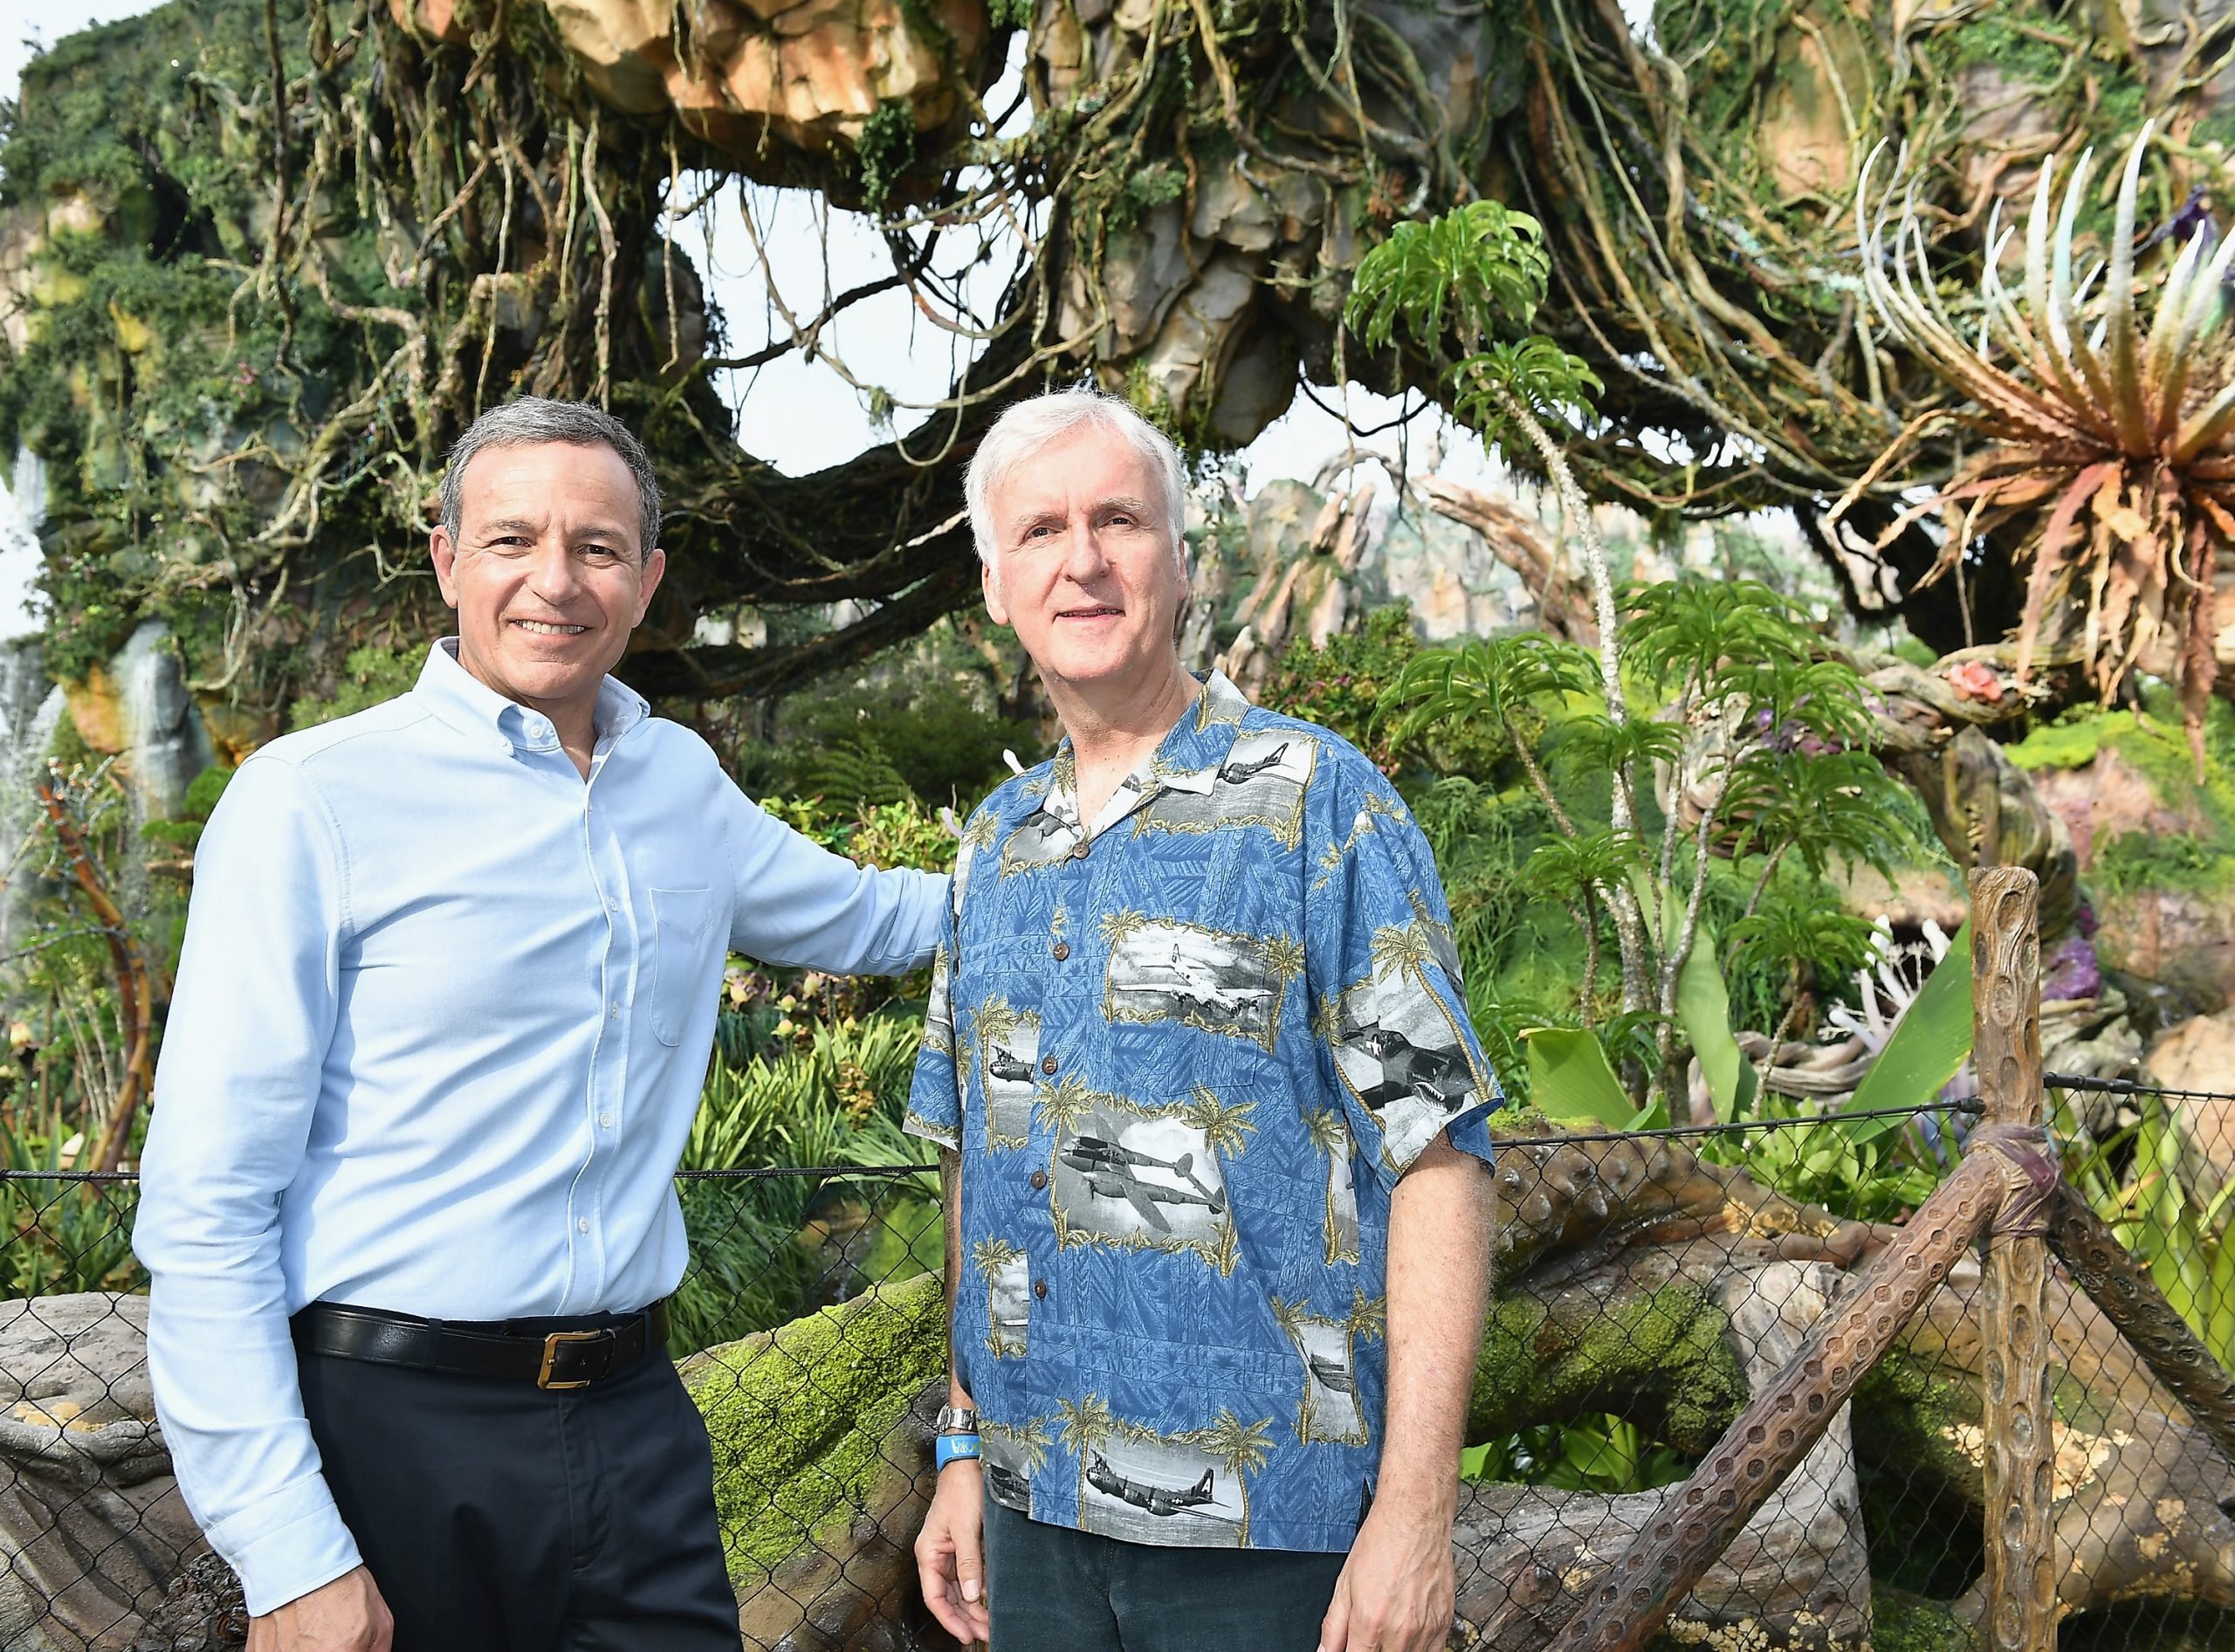 Former Disney CEO Bob Iger and director James Cameron attend the dedication for Pandora: The World of Avatar at Disney's Animal Kingdom